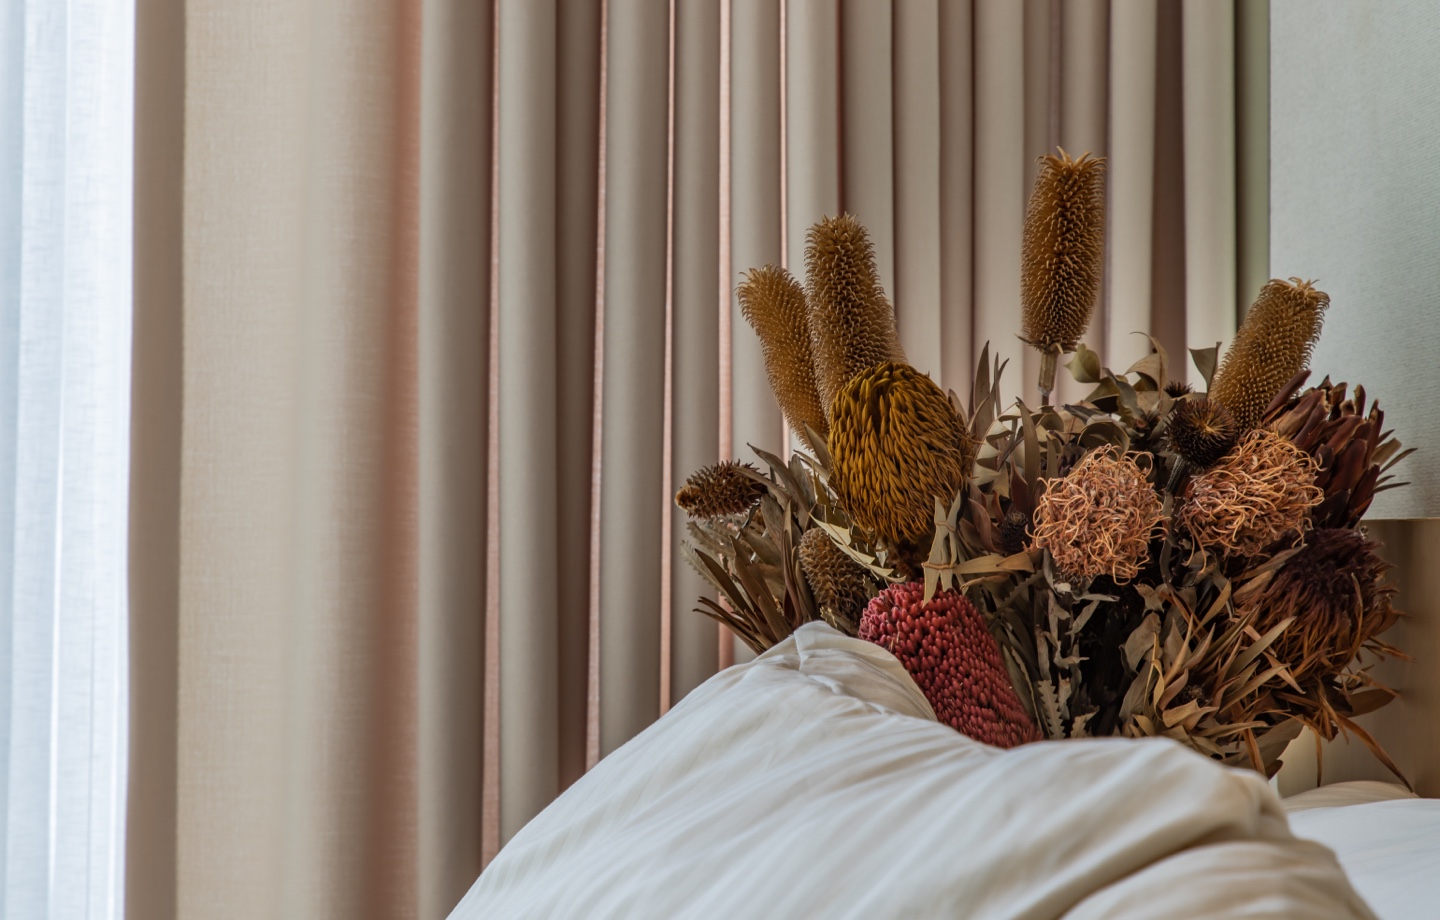 Pillows And Dried Flowers On Nightstand Header